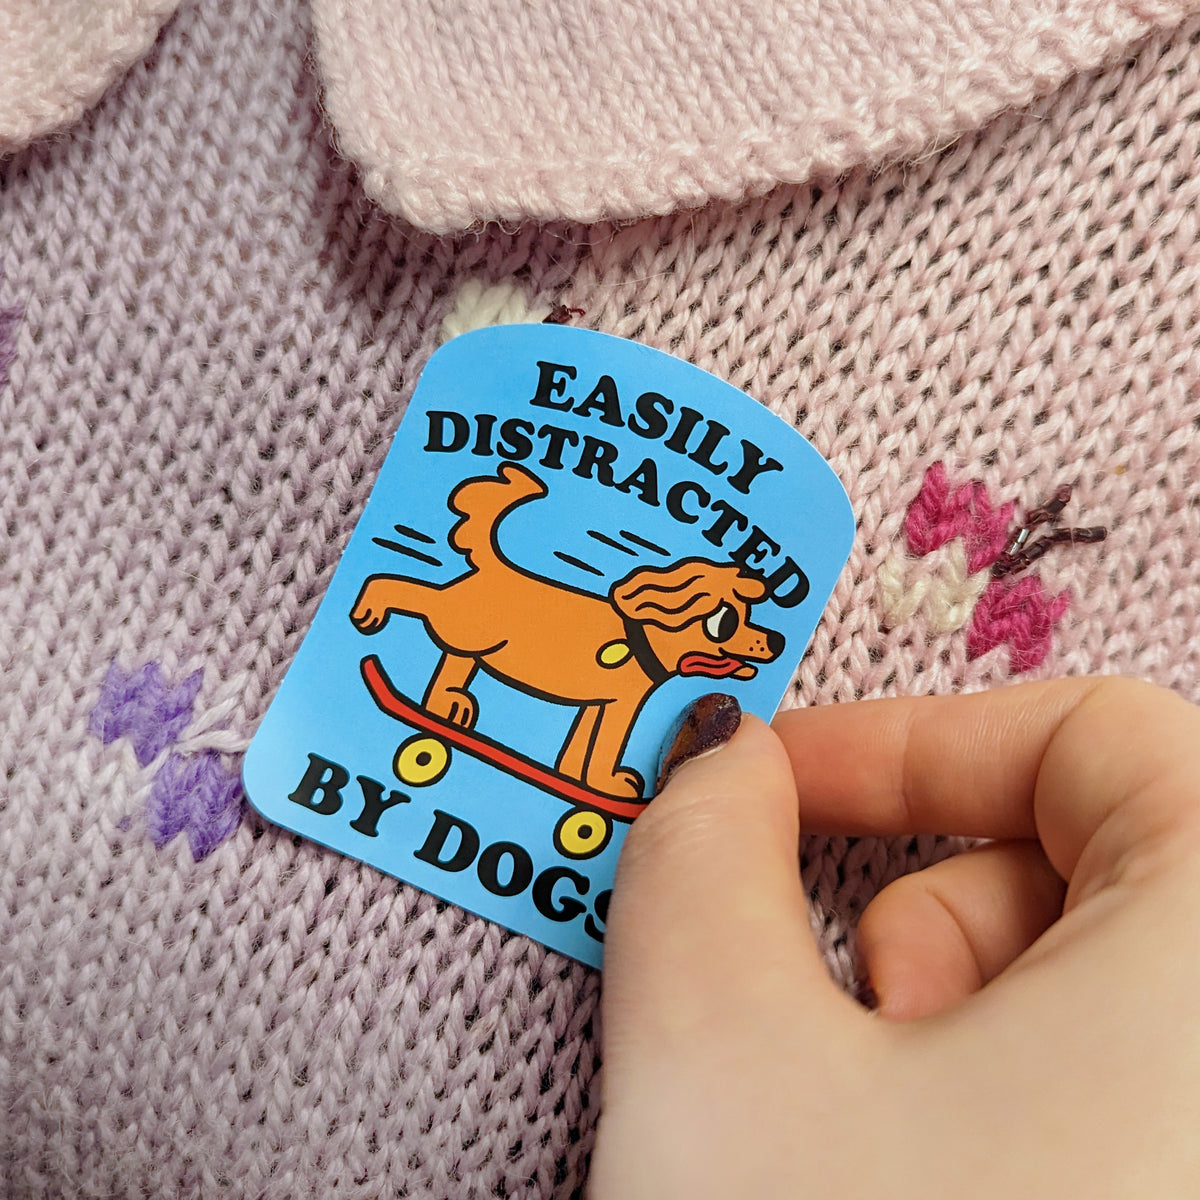 'Easily Distracted' sticker on jumper